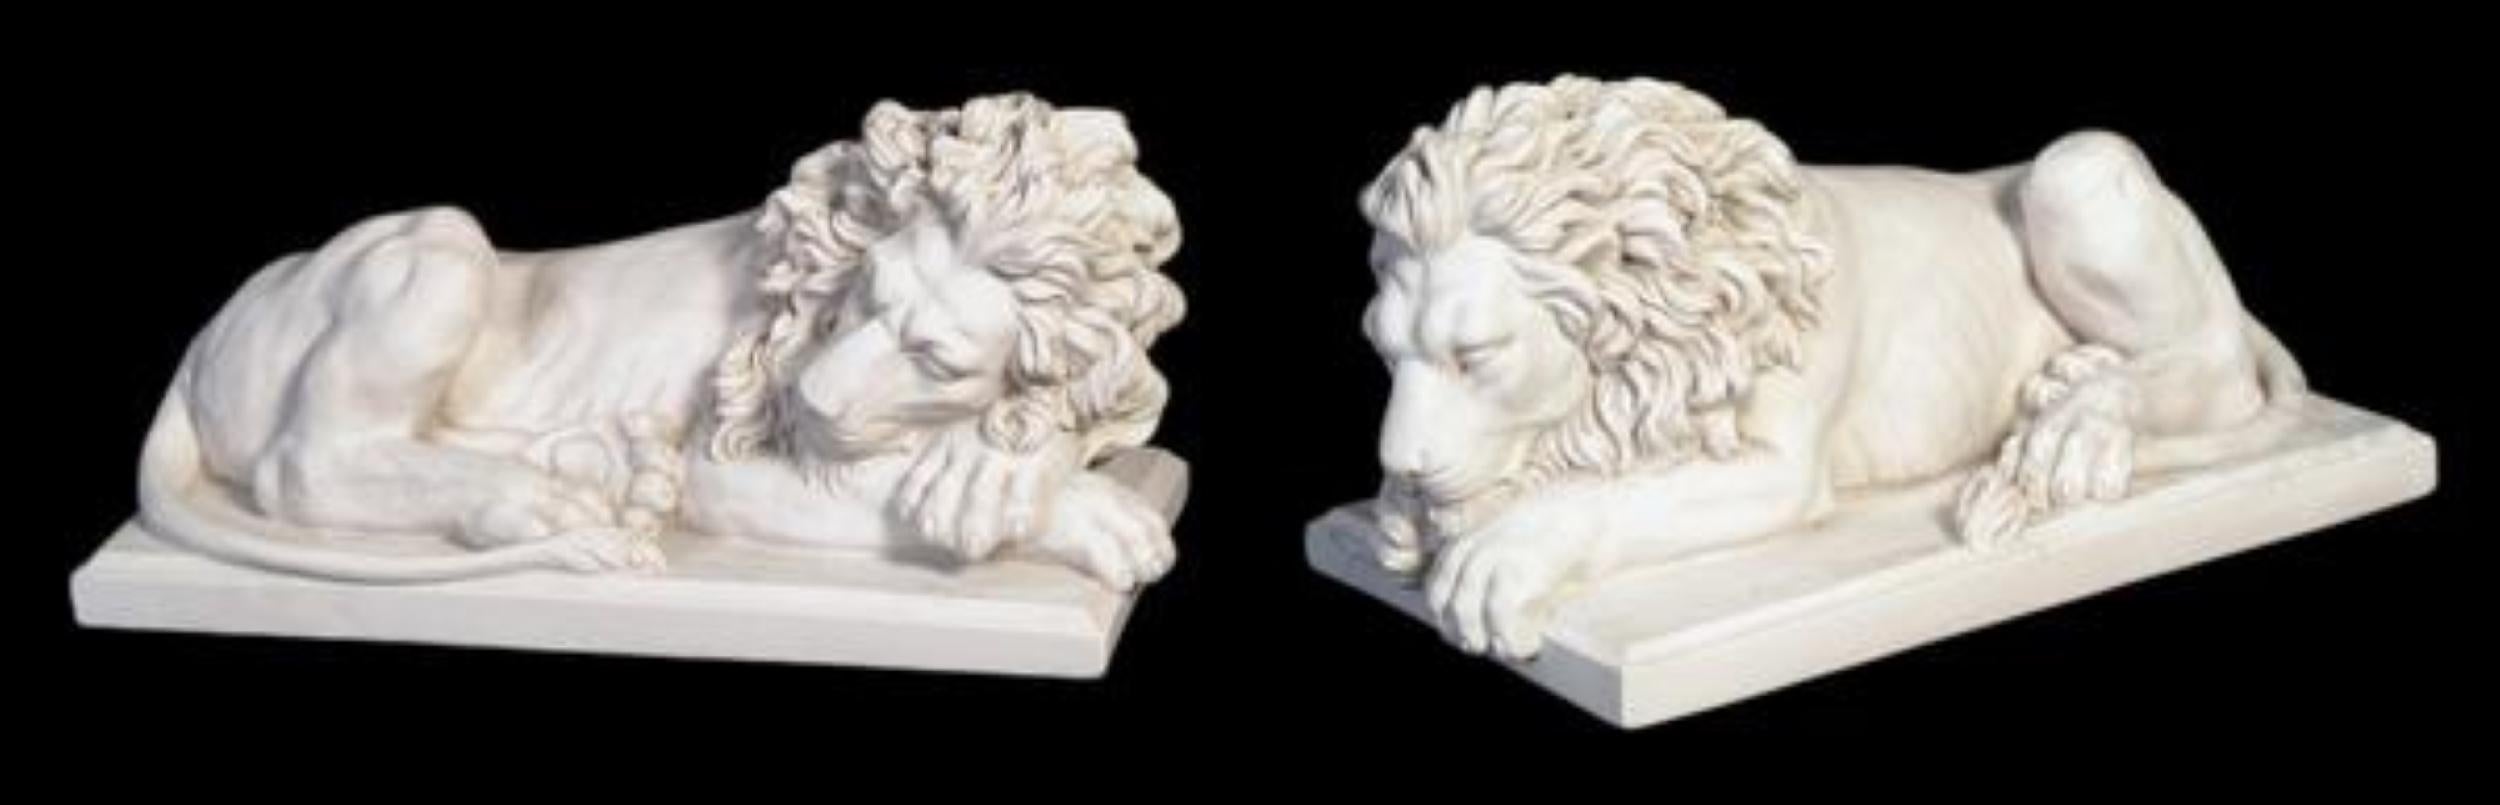 A pair of large lion’s statue.

These two sculptured lions are full of life and character, one being asleep and the other just awoke.

Marble sculpture

Our sculpture is produced by a unique and proprietary dry casting process. They are made